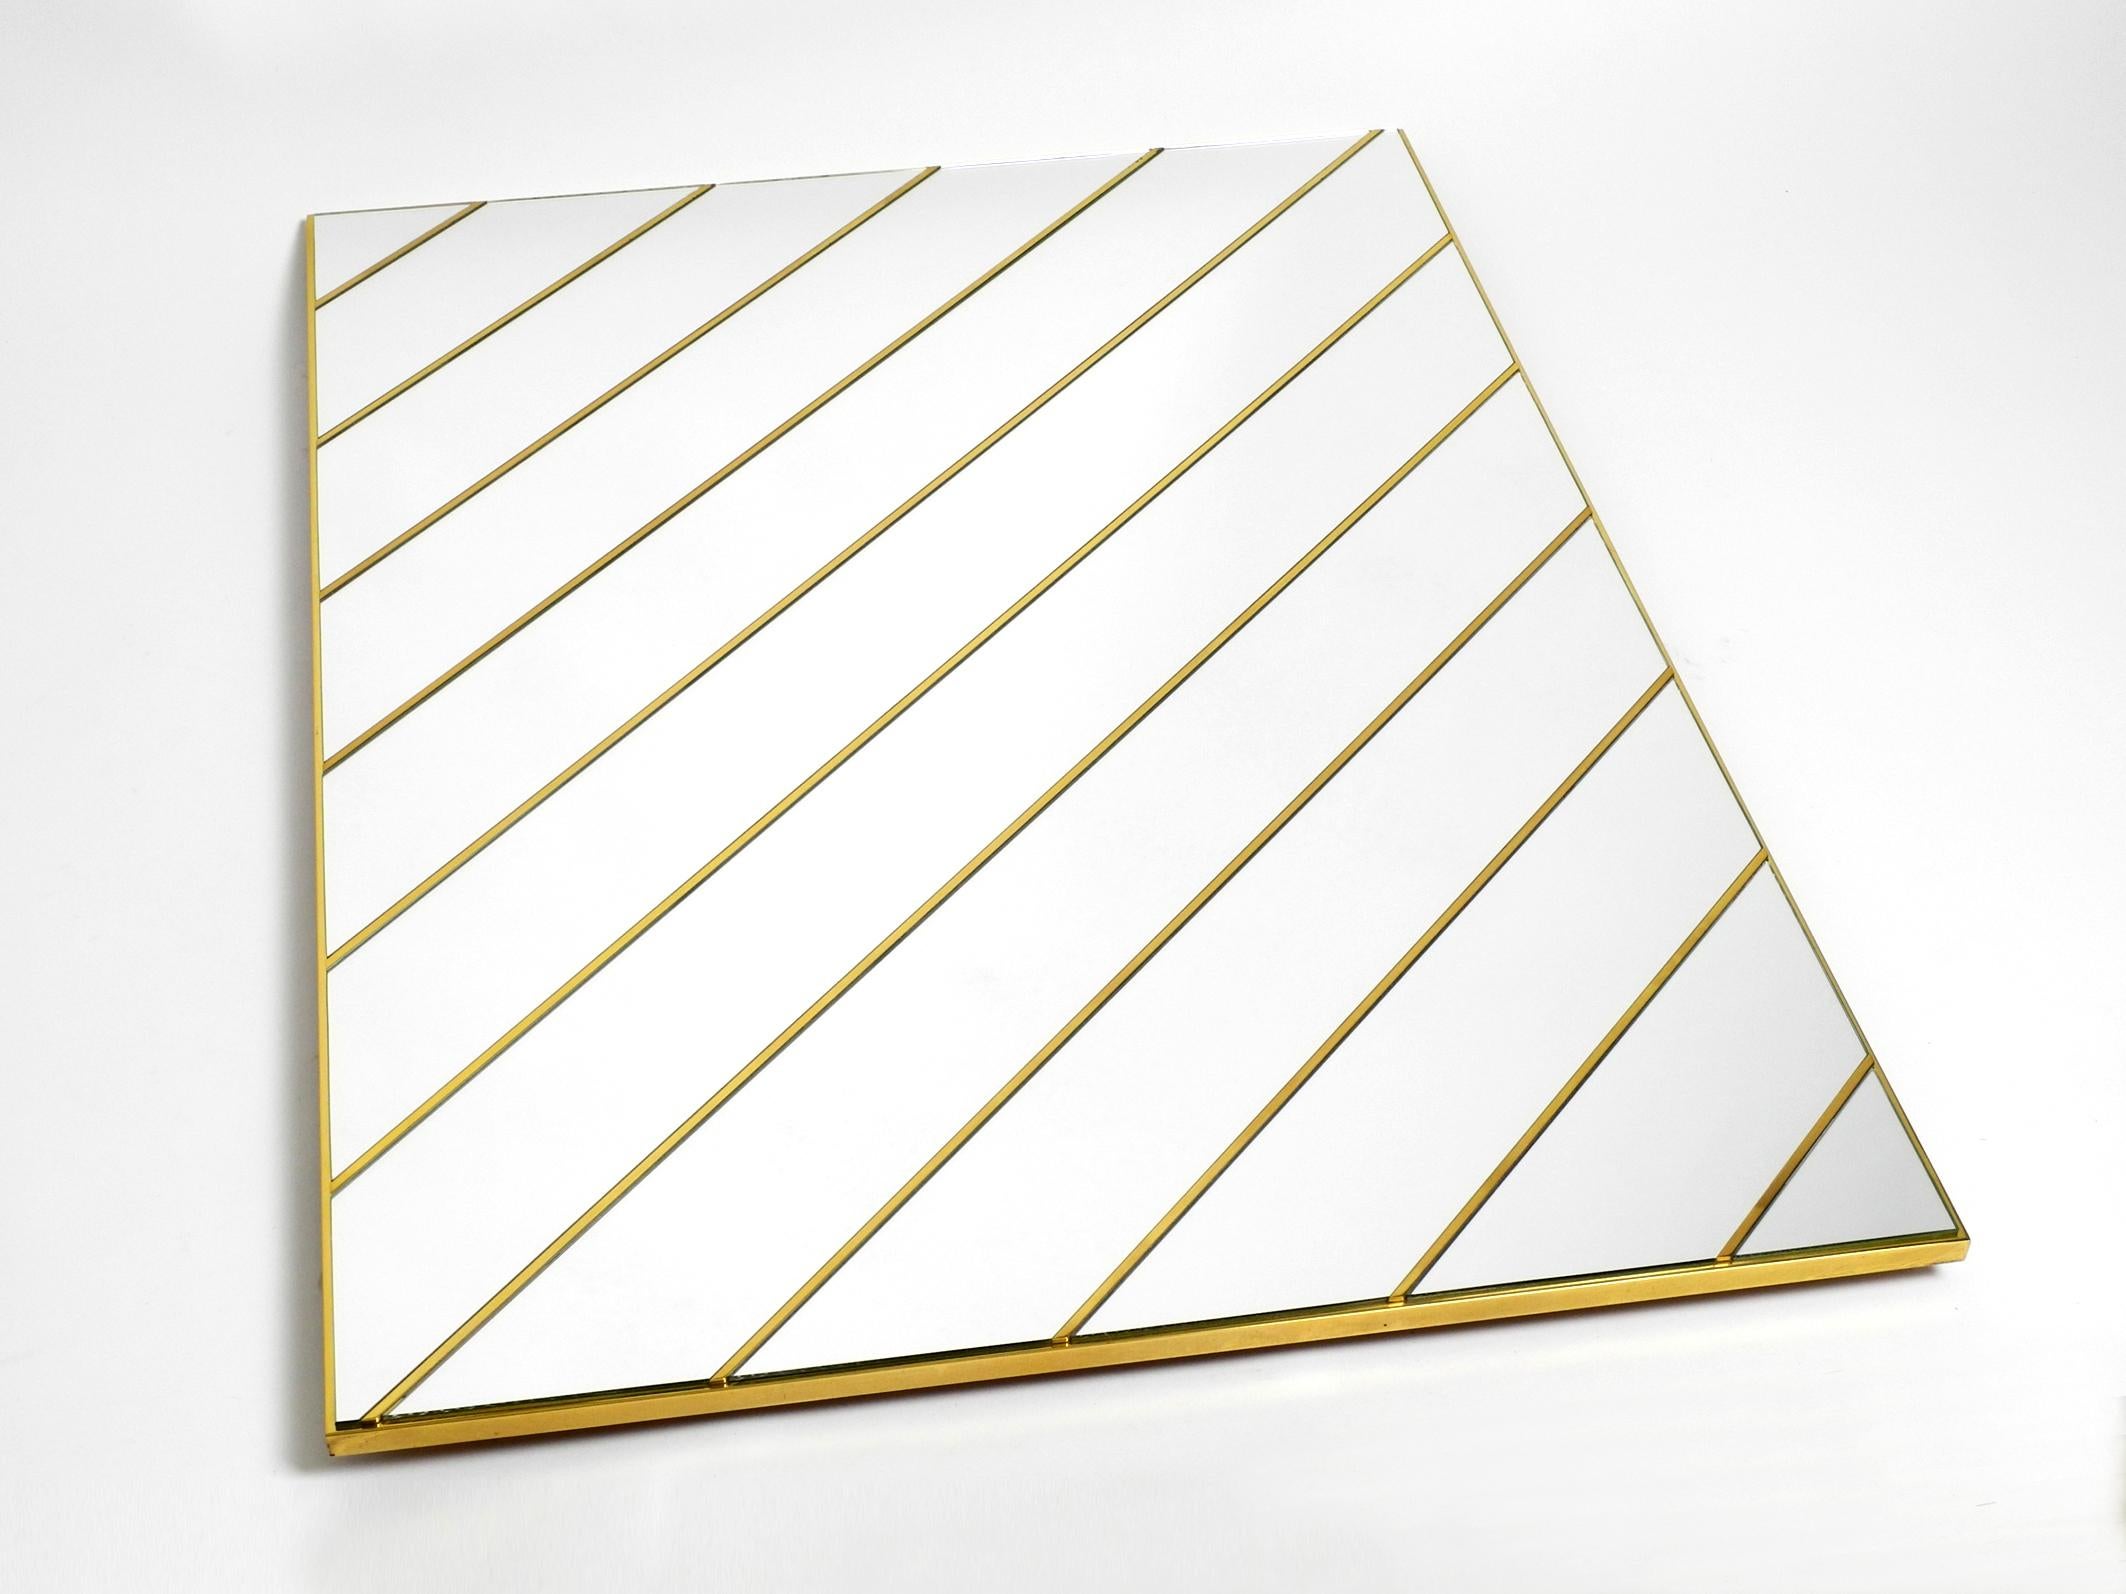 Large, exceptional 1970s brass wall mirror with single diagonal mirror stripes.
Great 1970s minimalist Rgency design. Very high quality and elegantly processed.
The complete frame and diagonal stripes are solid brass.
Very good condition with no